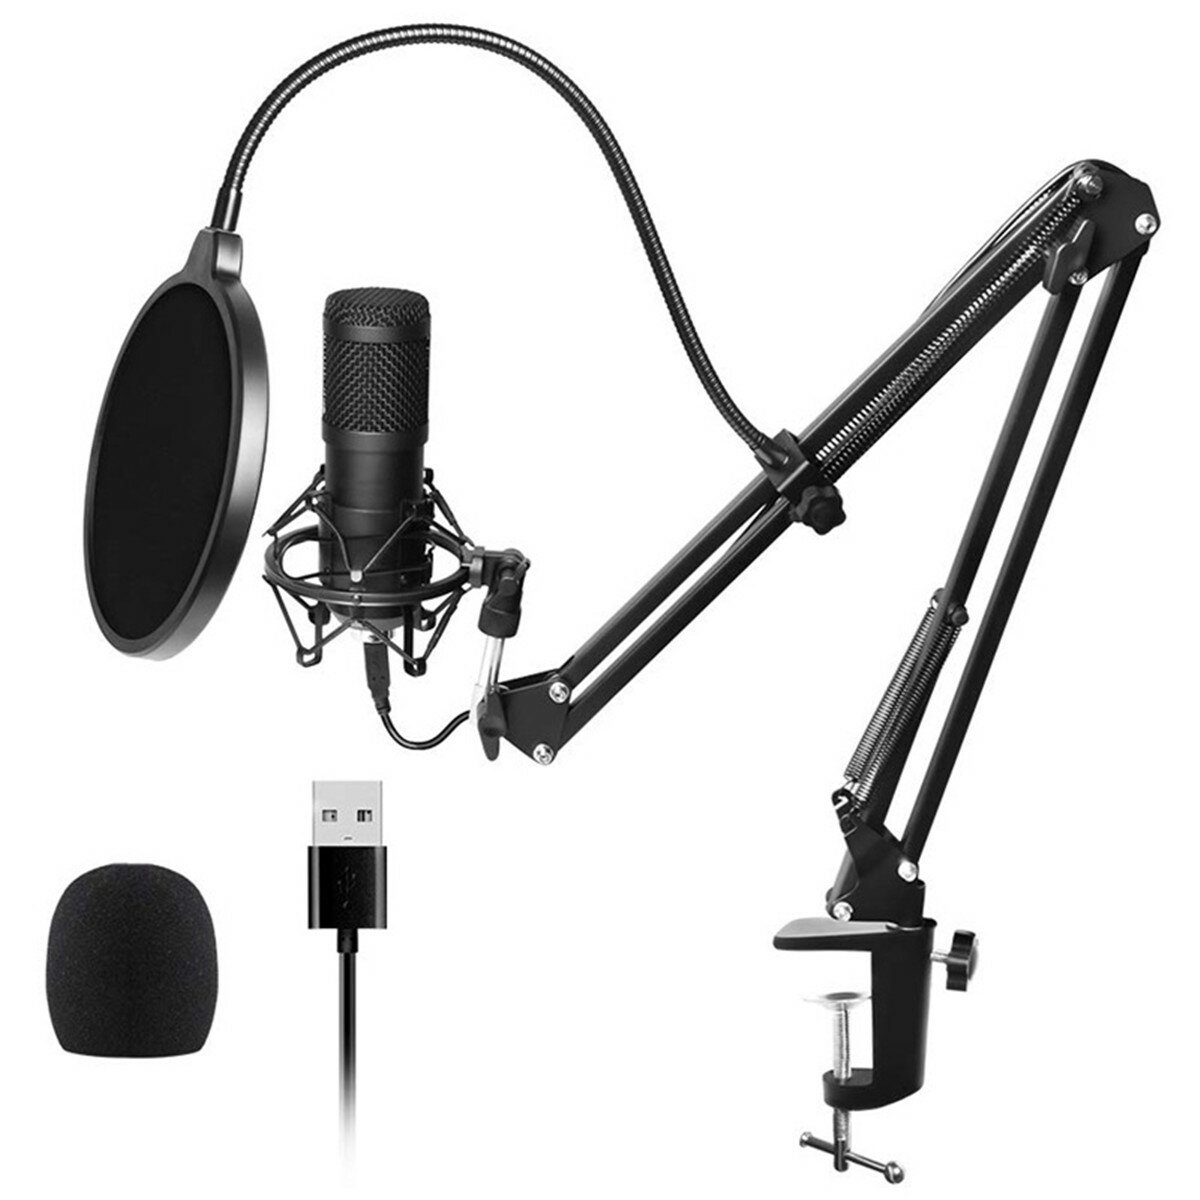 BM-800USB 192KHz/24Bit Metal USB Microphone Set Condenser Microphone Live Record Wired Computer Microphone